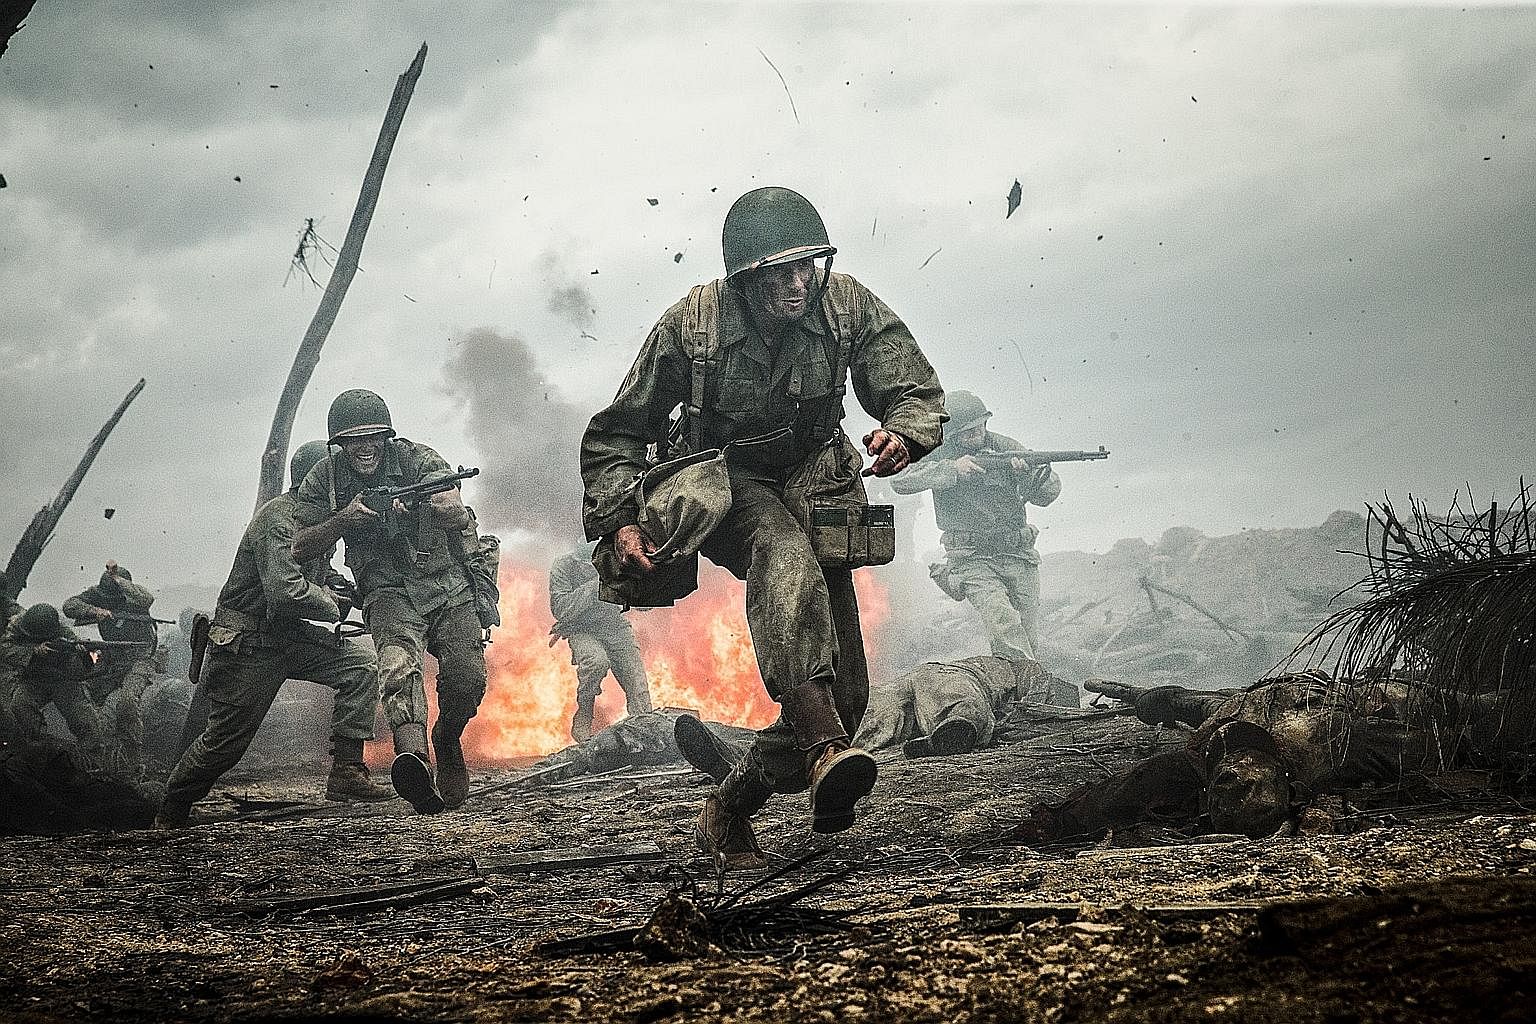 Andrew Garfield plays a soldier who refuses to bear arms in Hacksaw Ridge.